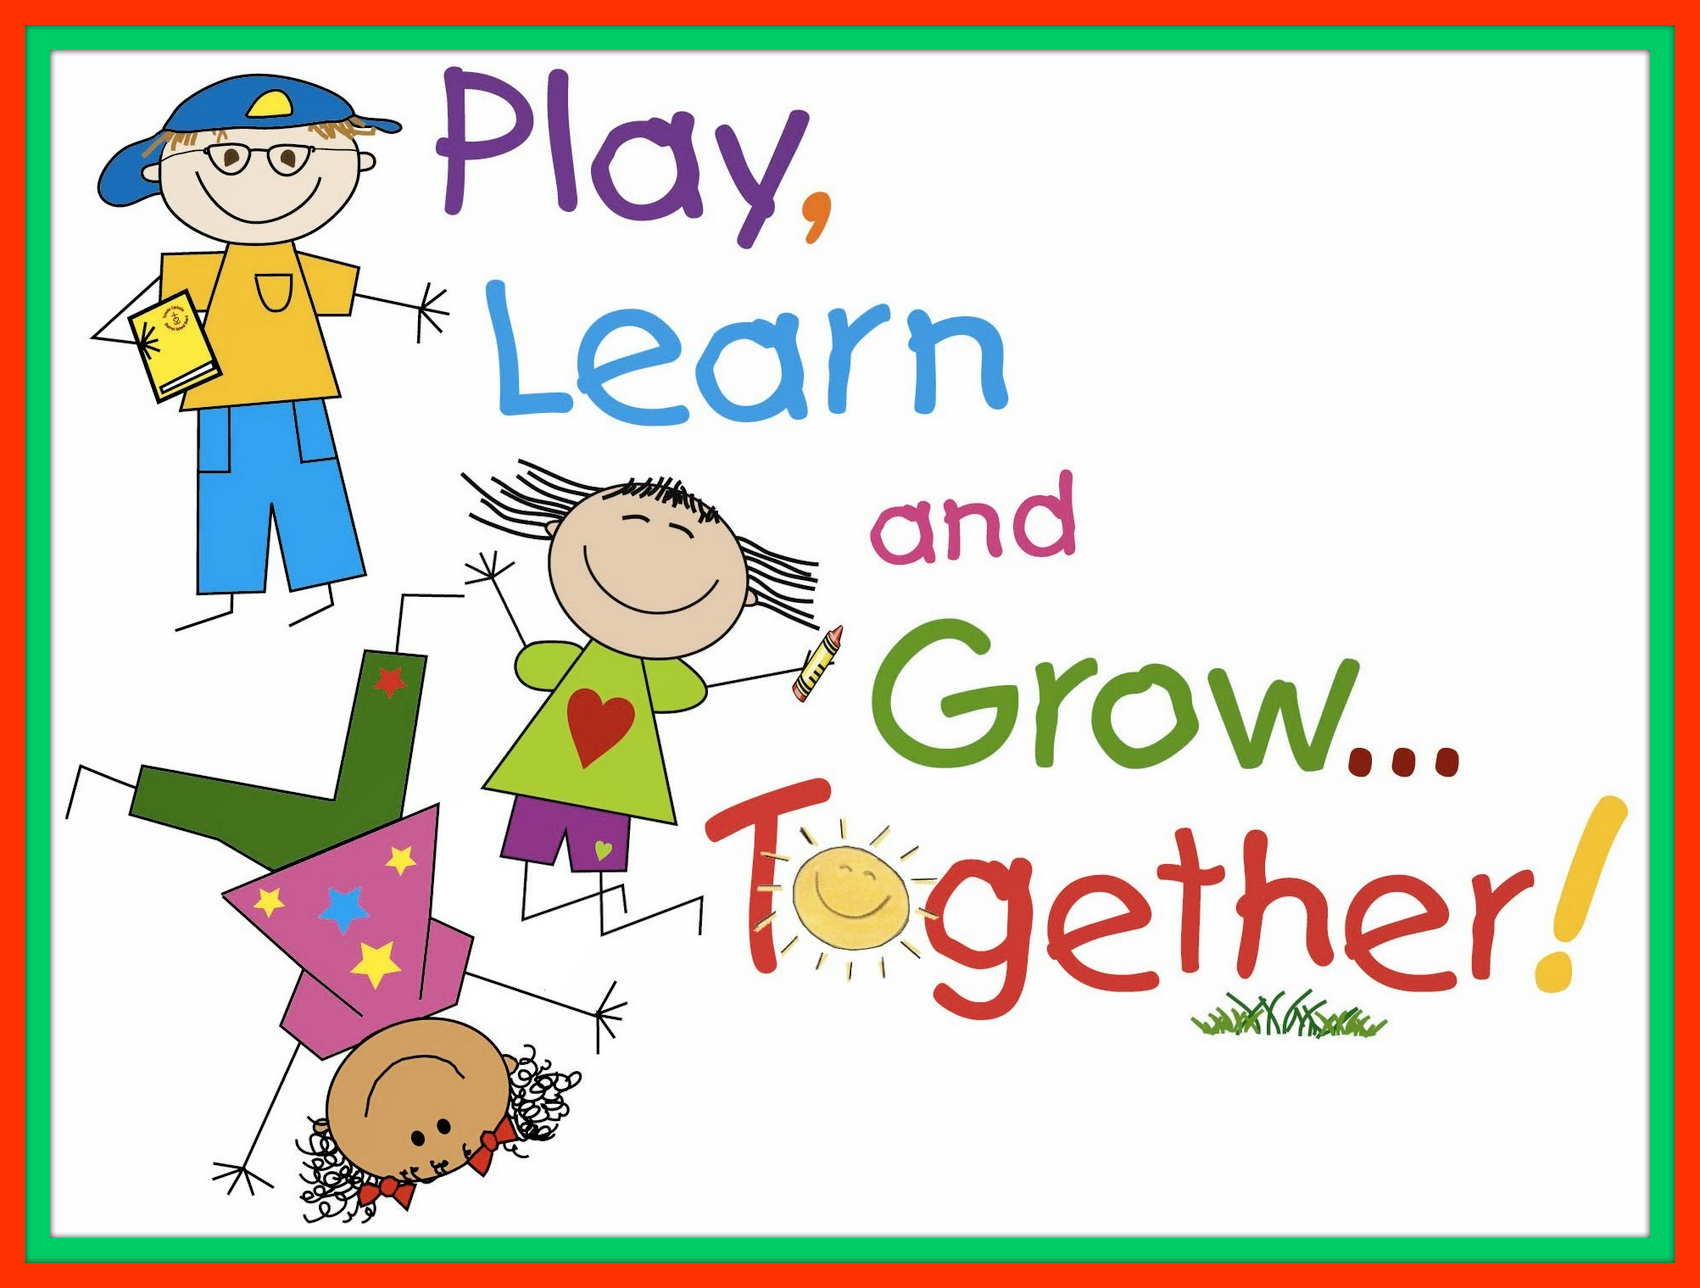 quotes about children learning